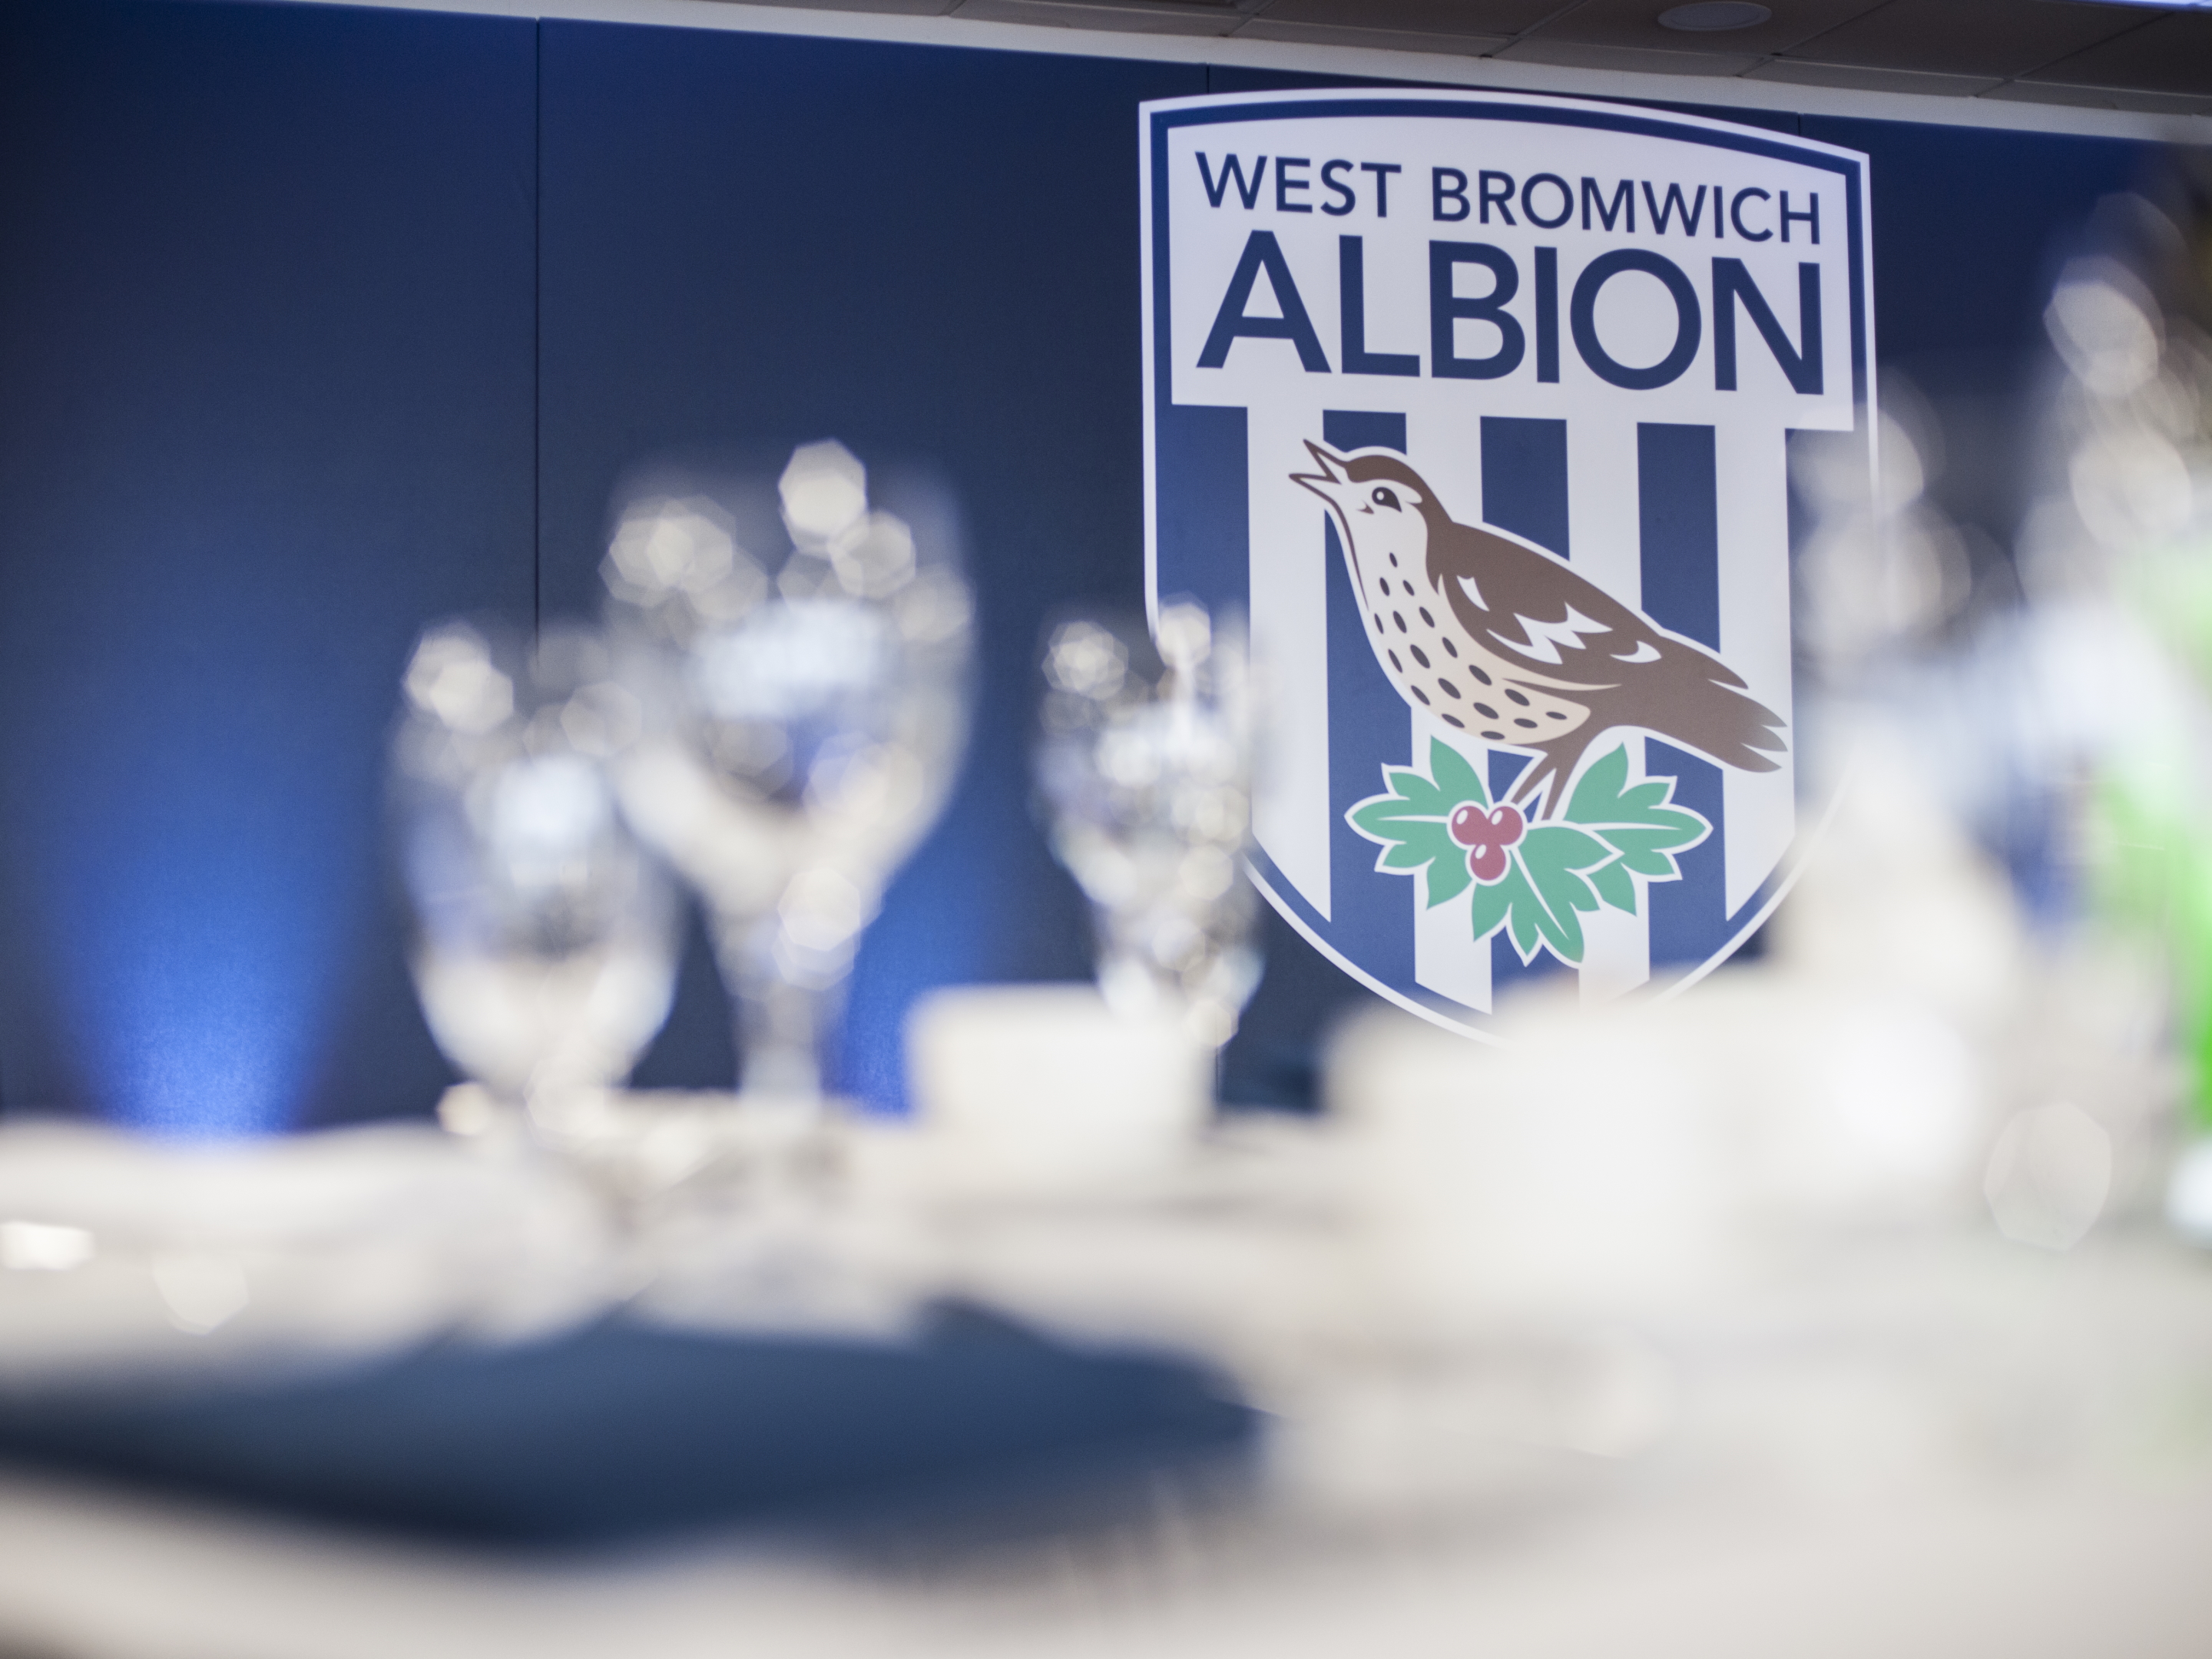 West Bromwich Albion Tickets - Circuit Hospitality